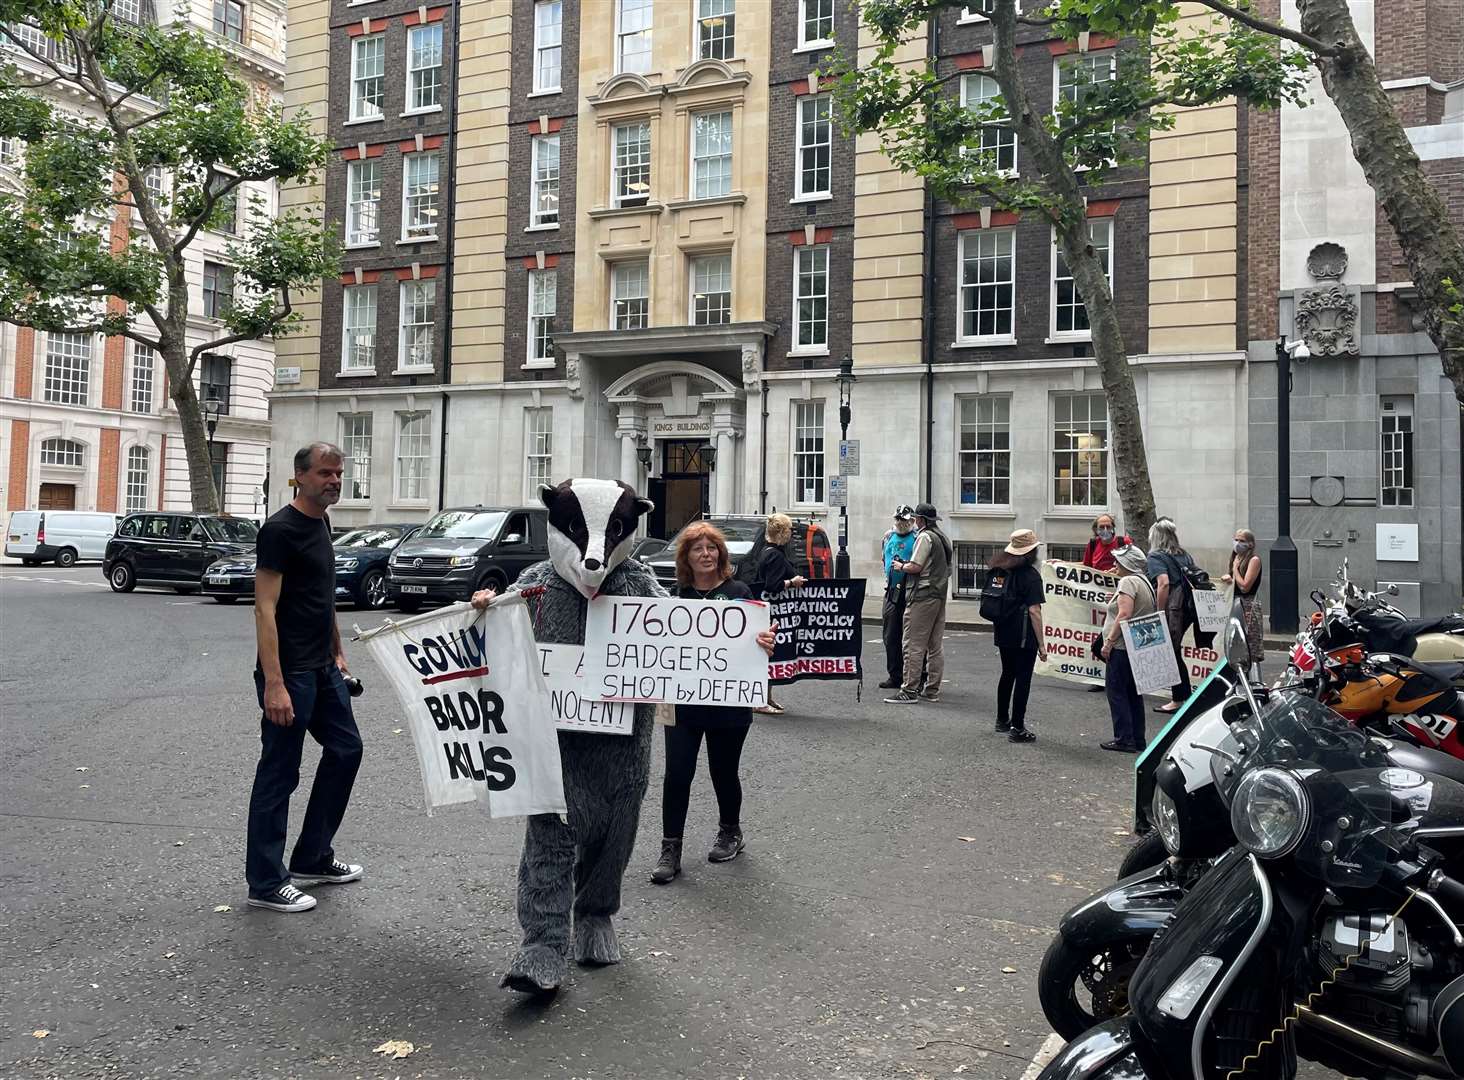 Badger cull protesters outside the Tory leadership hustings event (Sophie Wingate/PA)